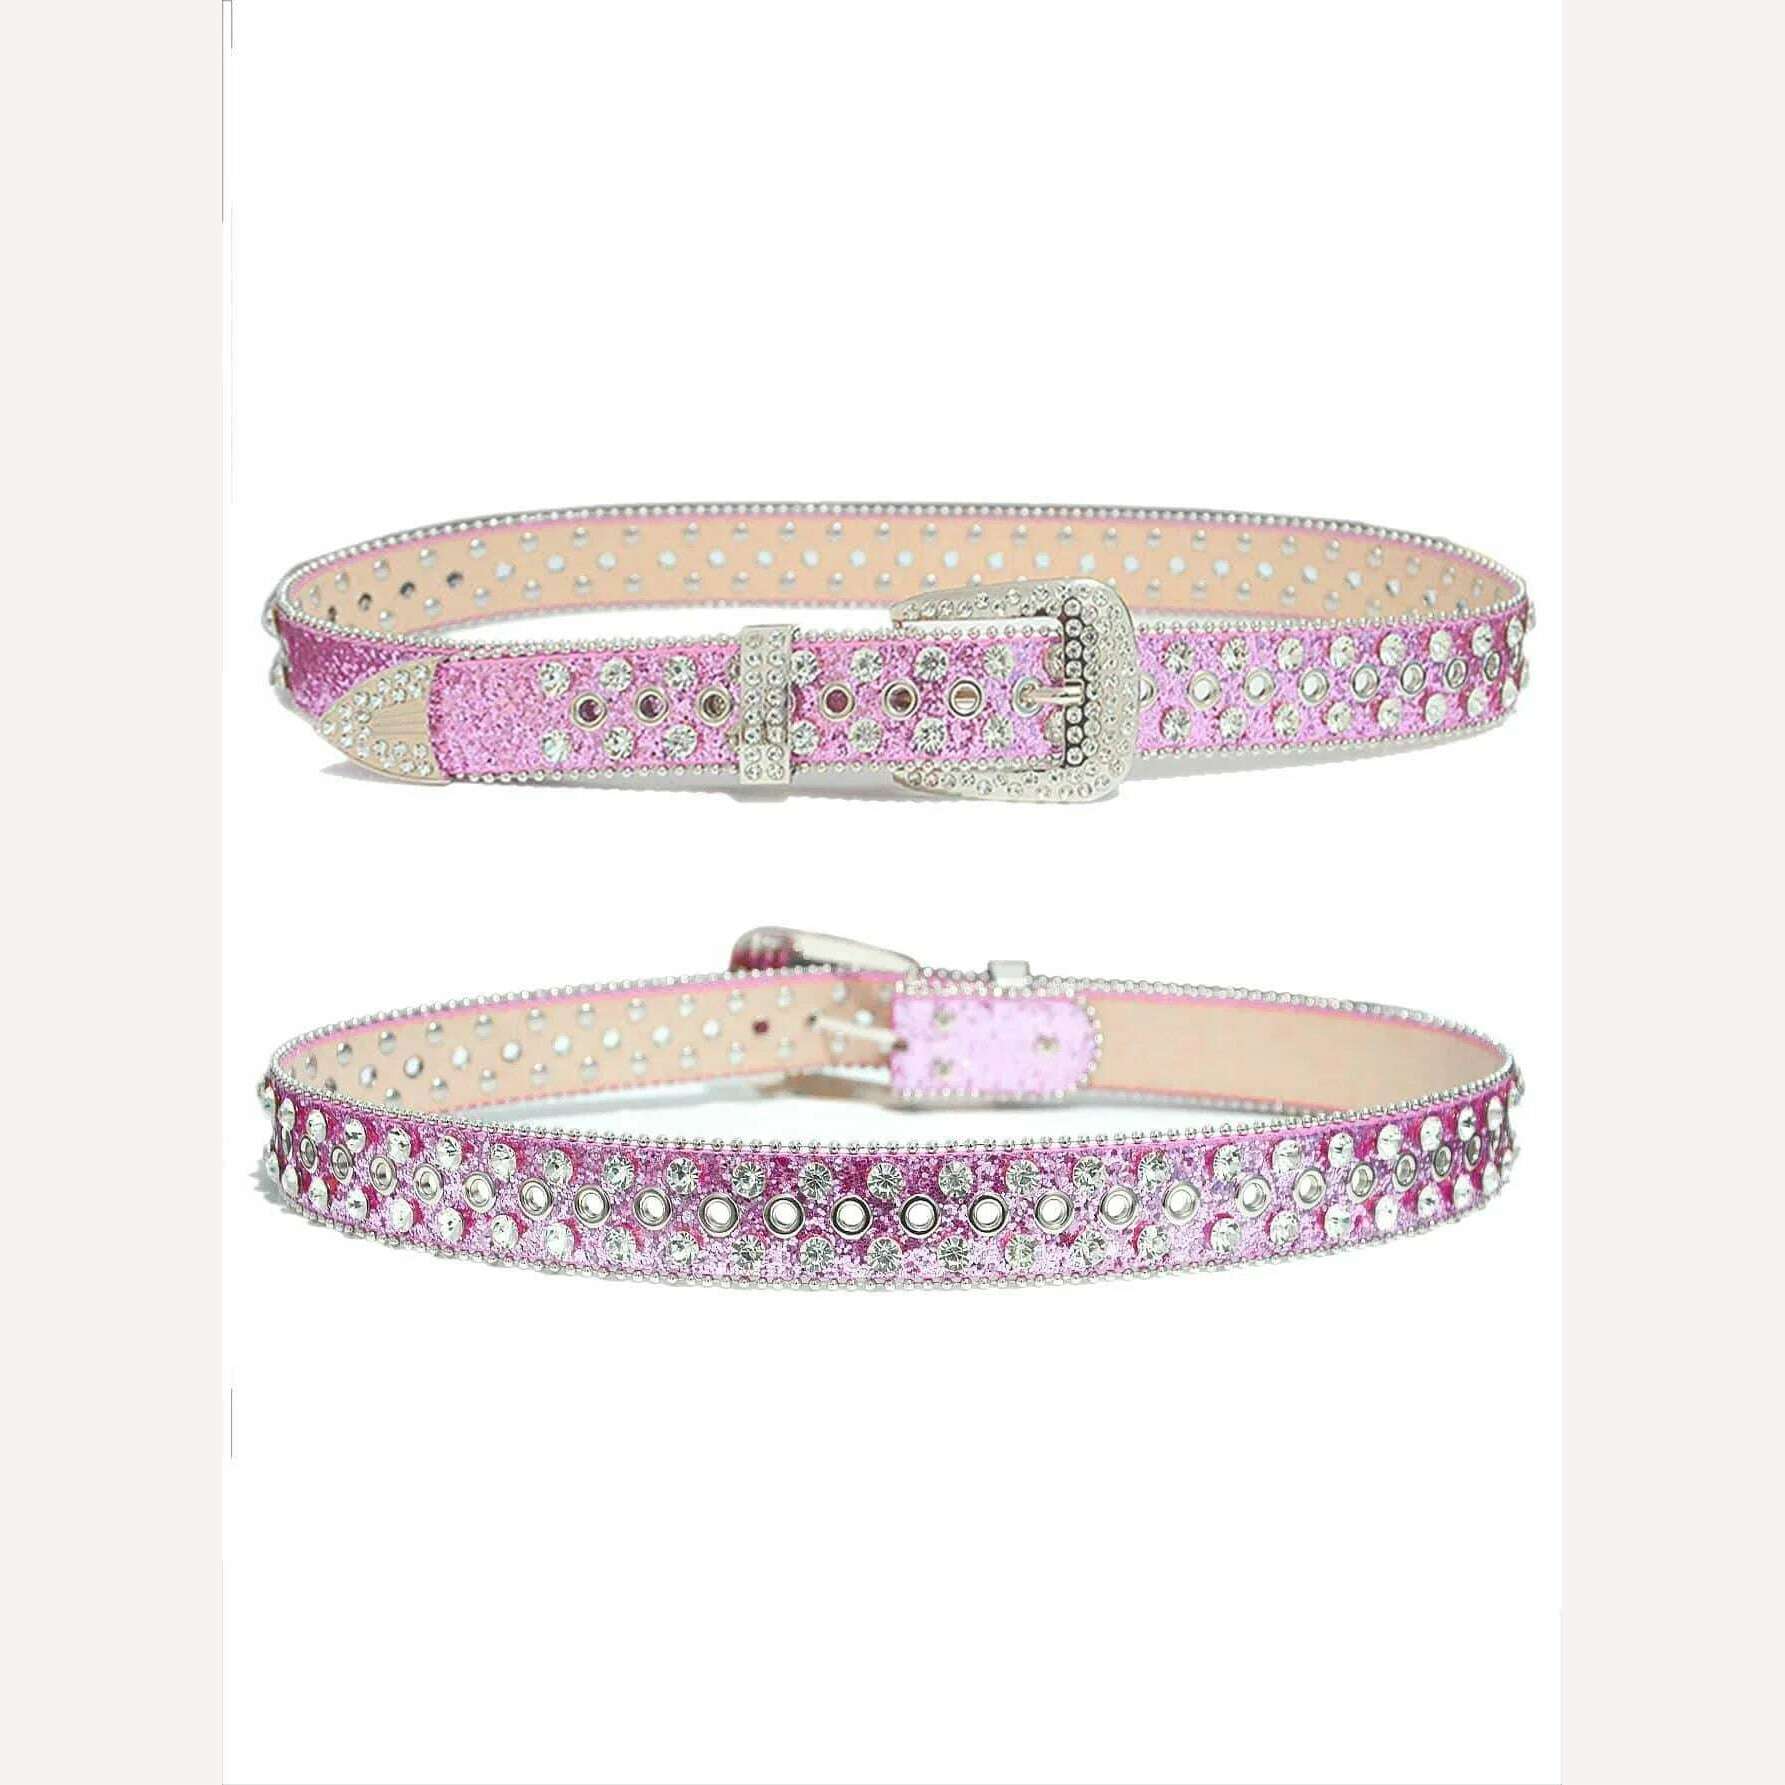 KIMLUD, Gorgeous Rhinestone Studded Belt - Perfect Gift for Her on Valentine's Day or Wedding Party!, Pink / 100CM, KIMLUD Women's Clothes